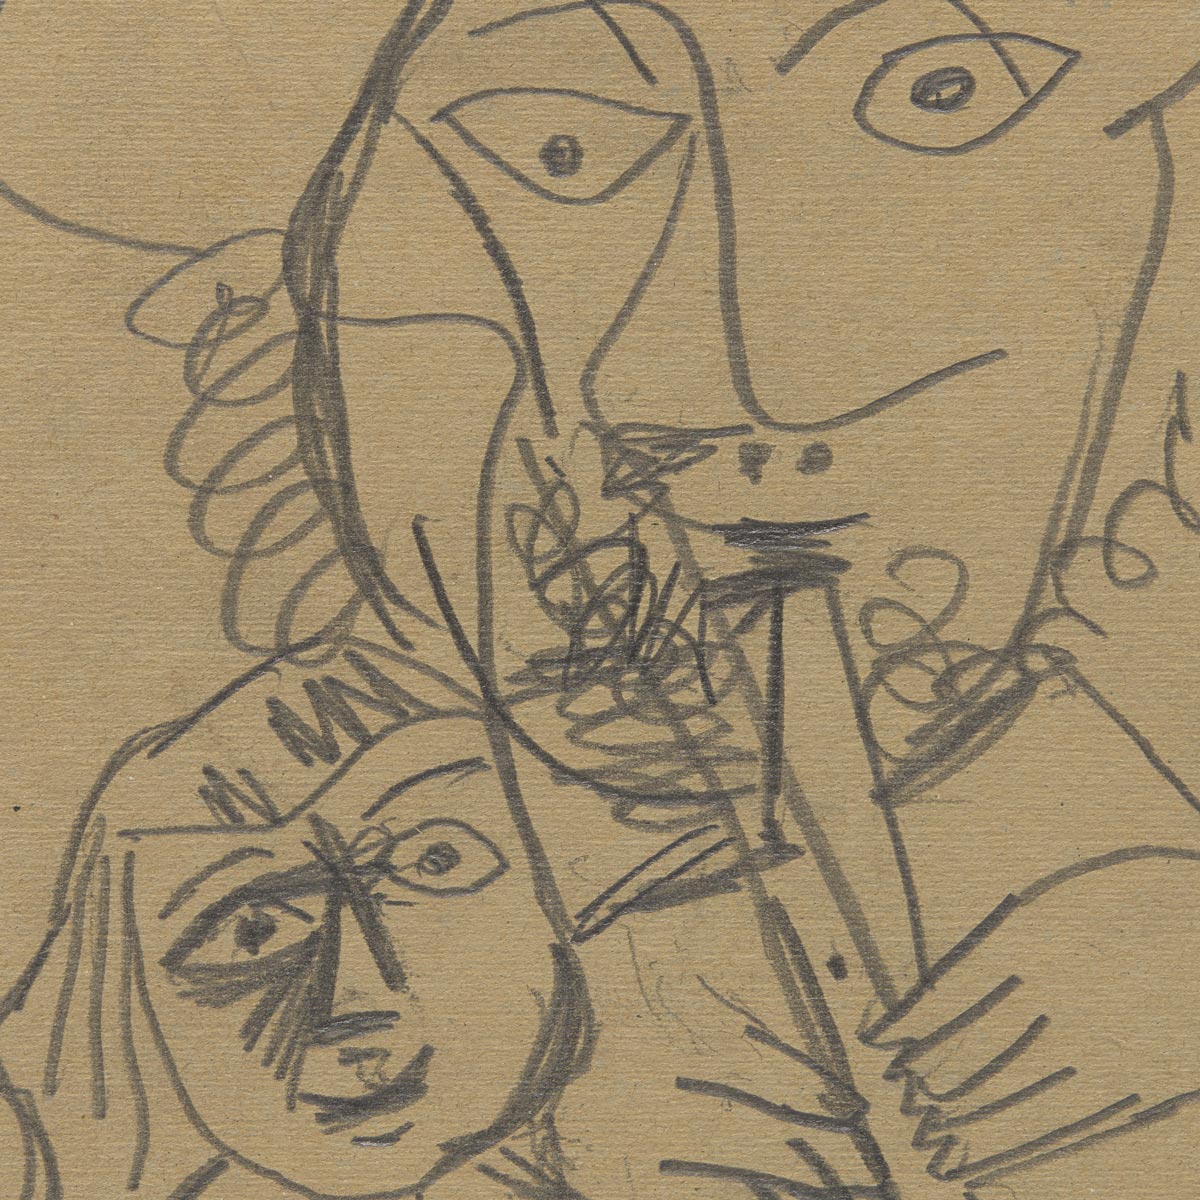 Picasso detail